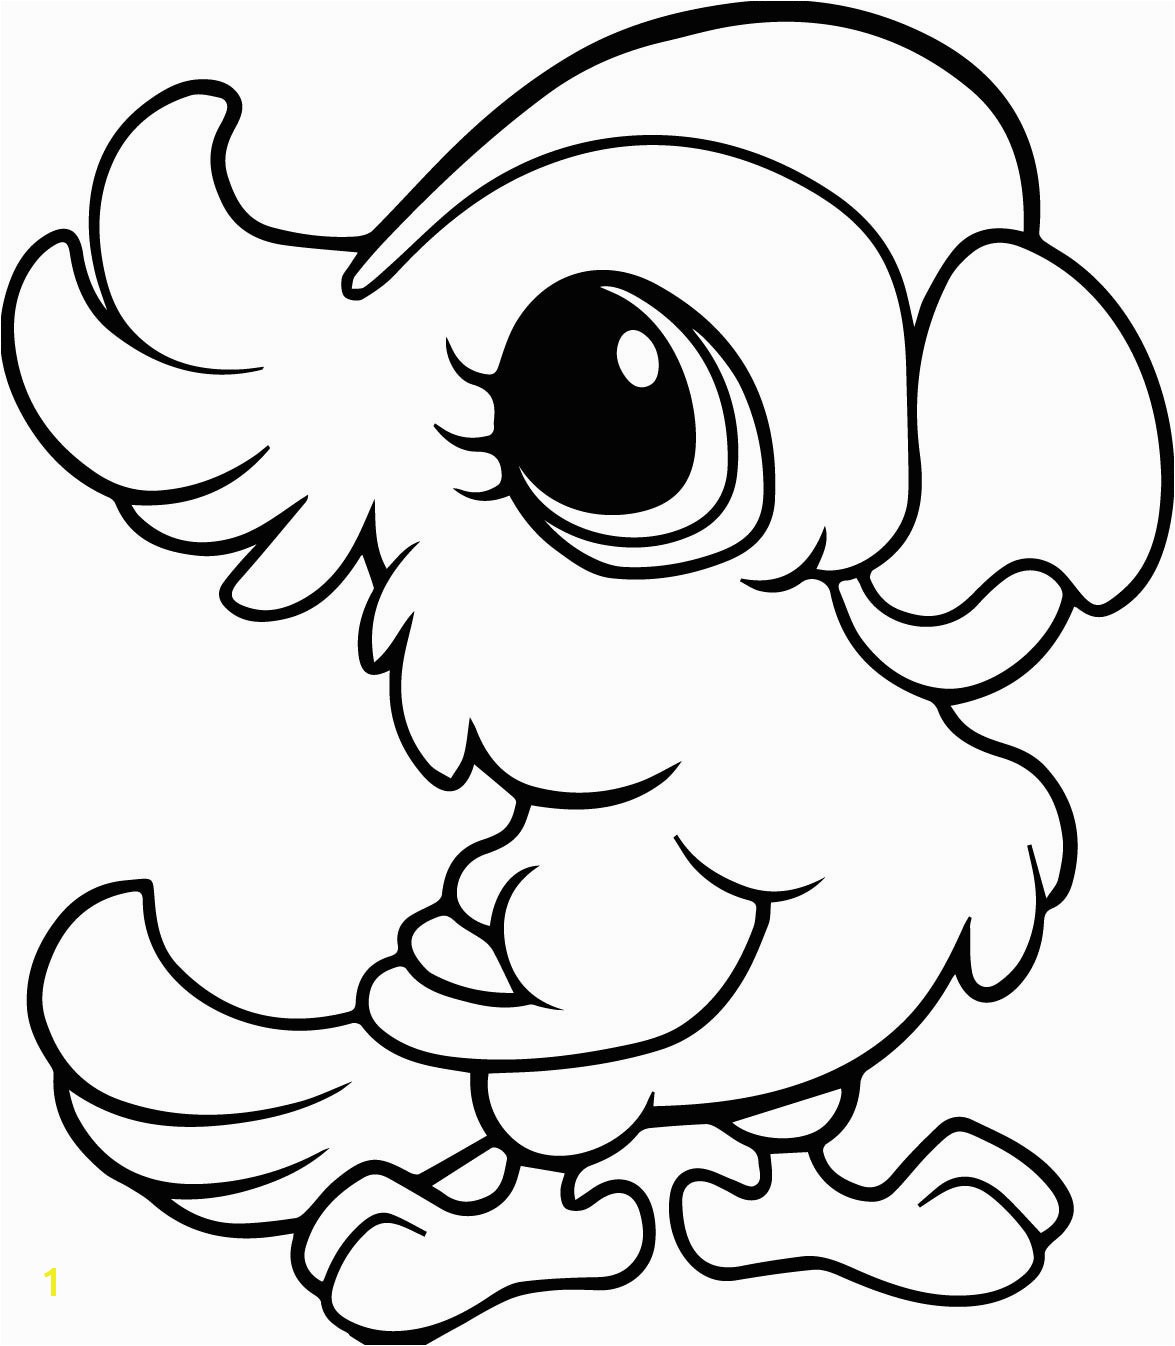 Very Cute Animal Coloring Pages top Pichers to Print Colorful Animals Coloring Pages